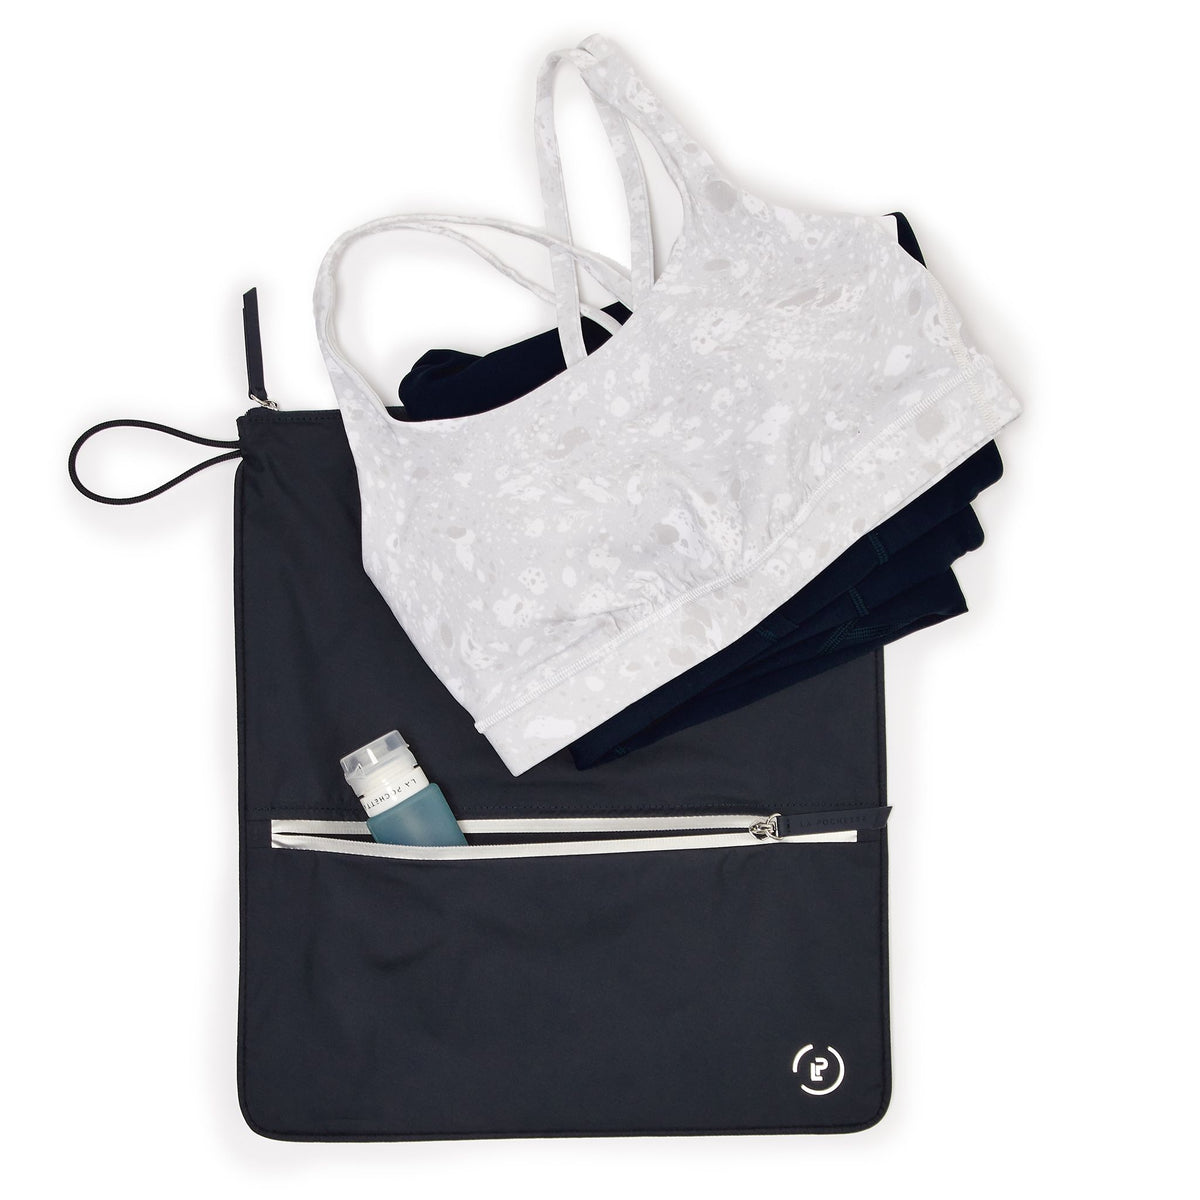 Midnight Silver Sweat bag laying flat, with front pocket open with a travel bottle inside, and workout kit on top of sweat bag.